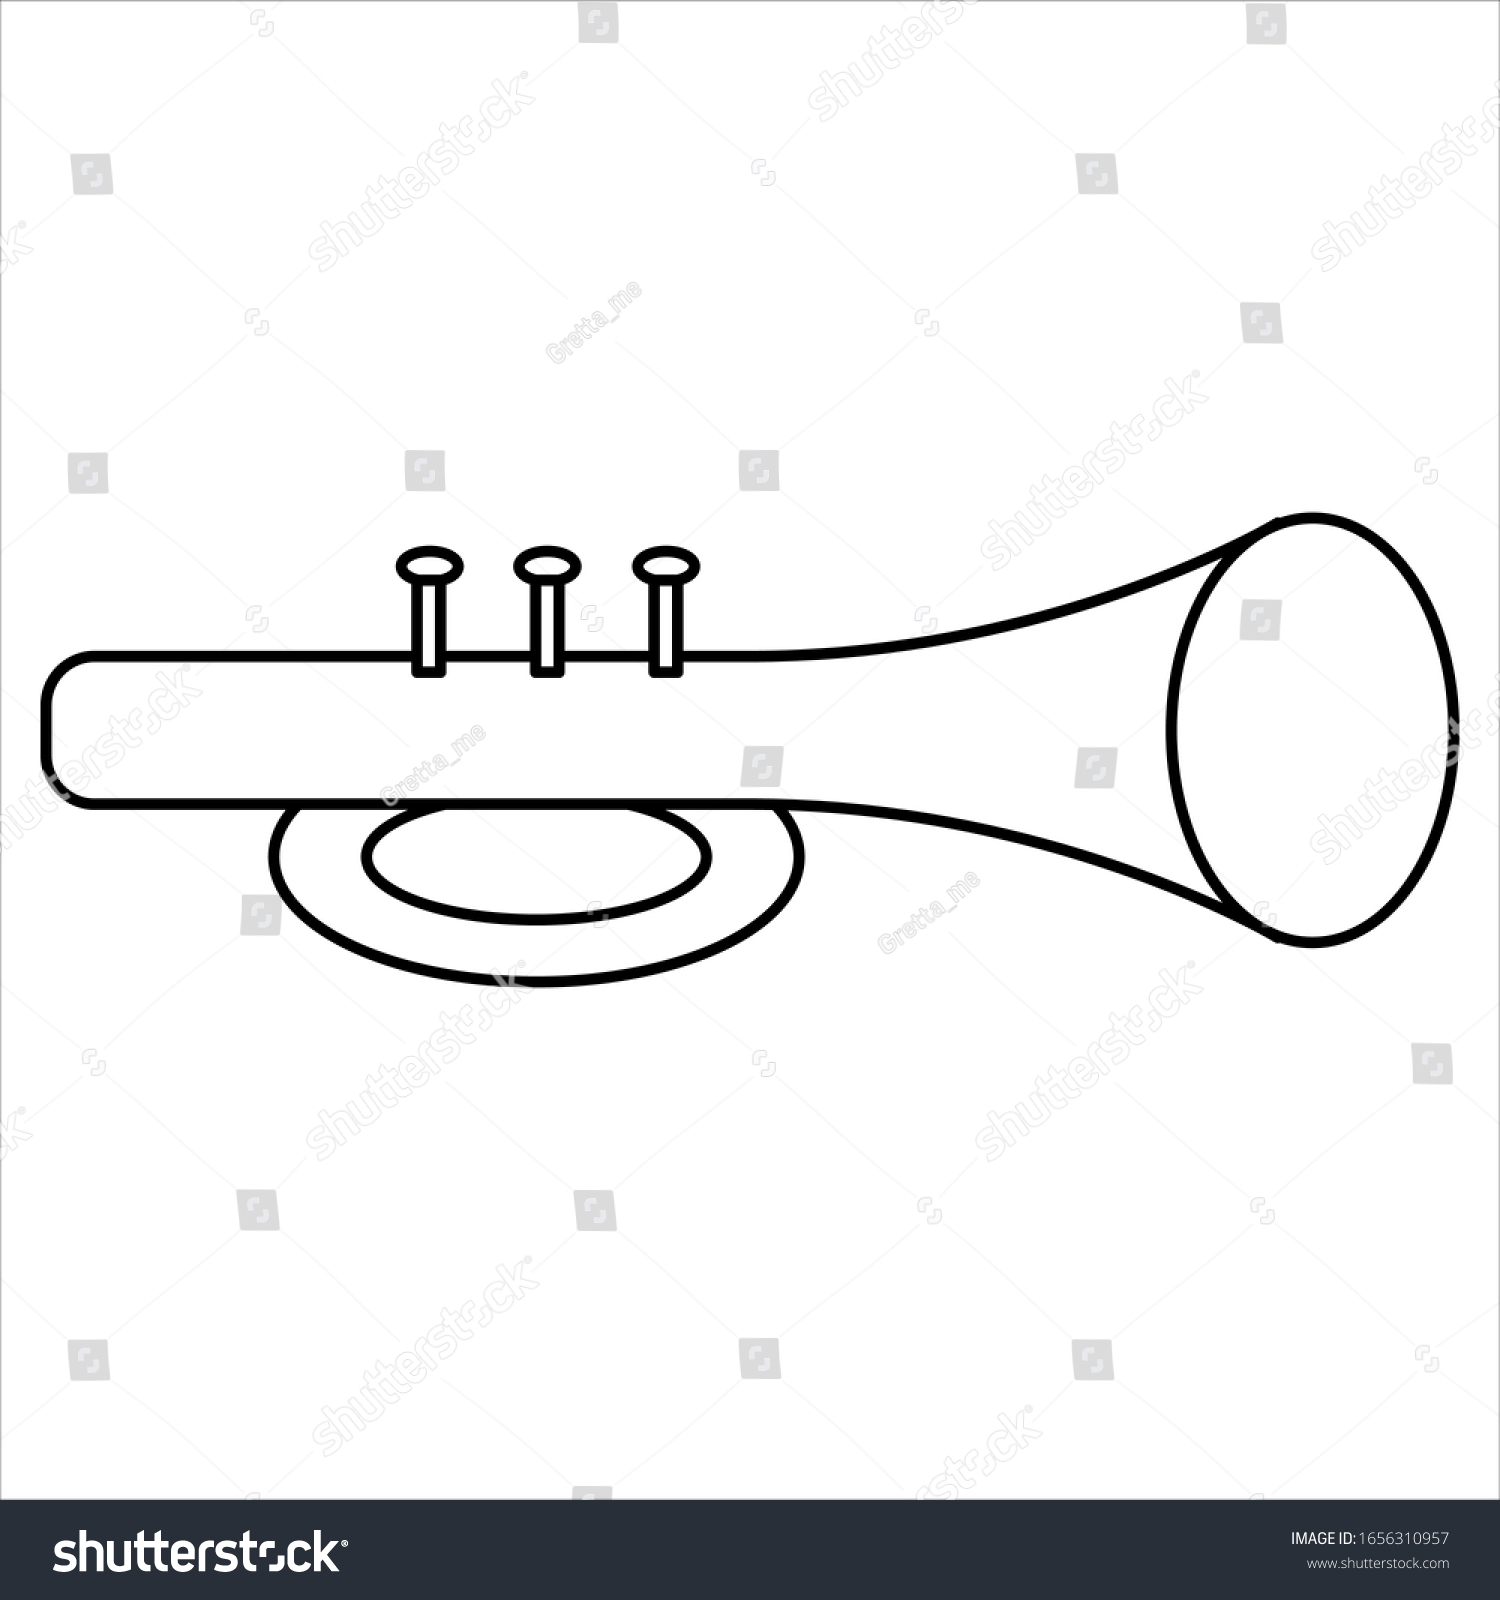 Coloring Page Outline Trumpet Toy Simple Stock Vector (Royalty Free ...